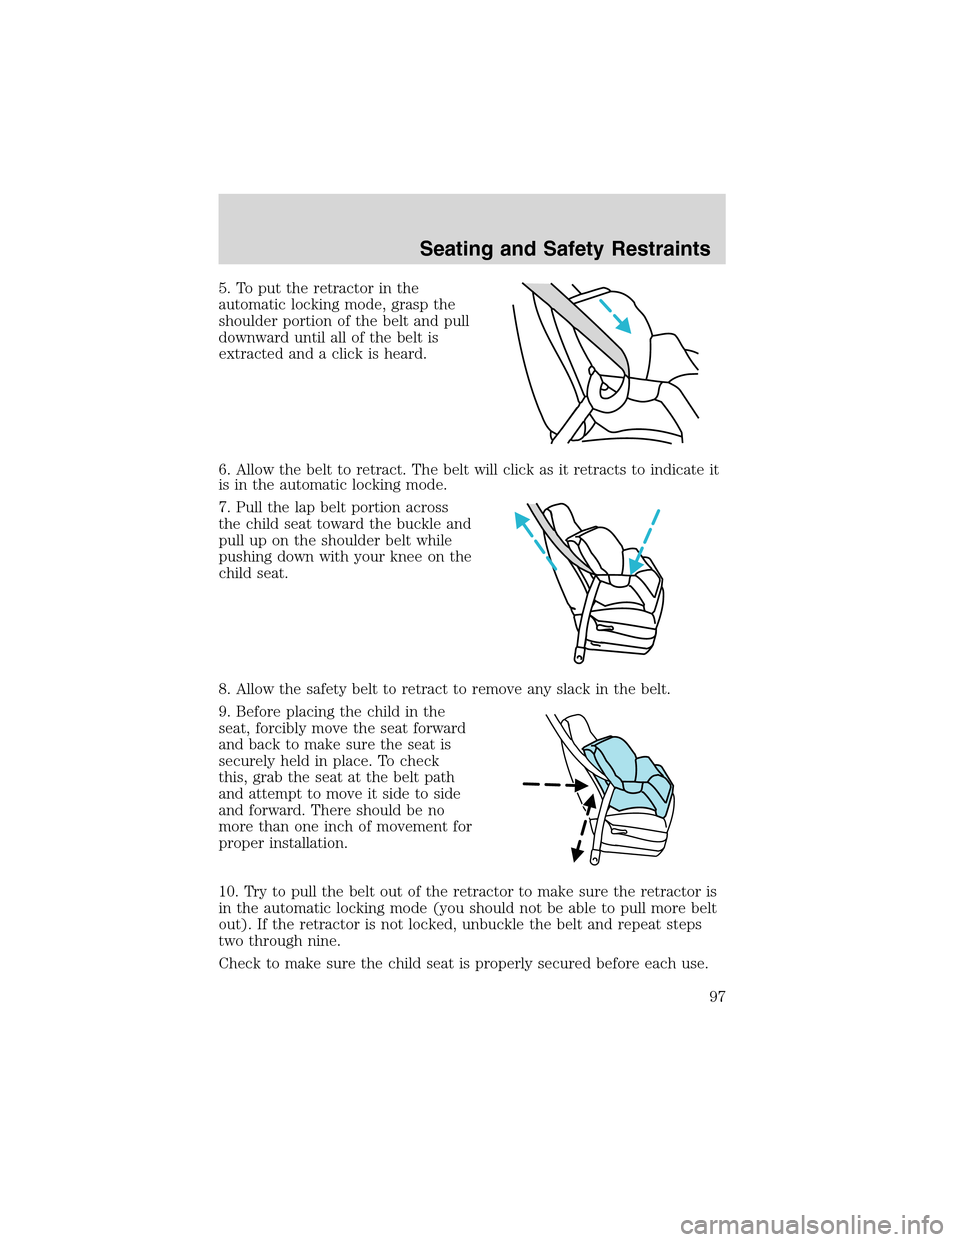 FORD THUNDERBIRD 2003 11.G Owners Manual 5. To put the retractor in the
automatic locking mode, grasp the
shoulder portion of the belt and pull
downward until all of the belt is
extracted and a click is heard.
6. Allow the belt to retract. T